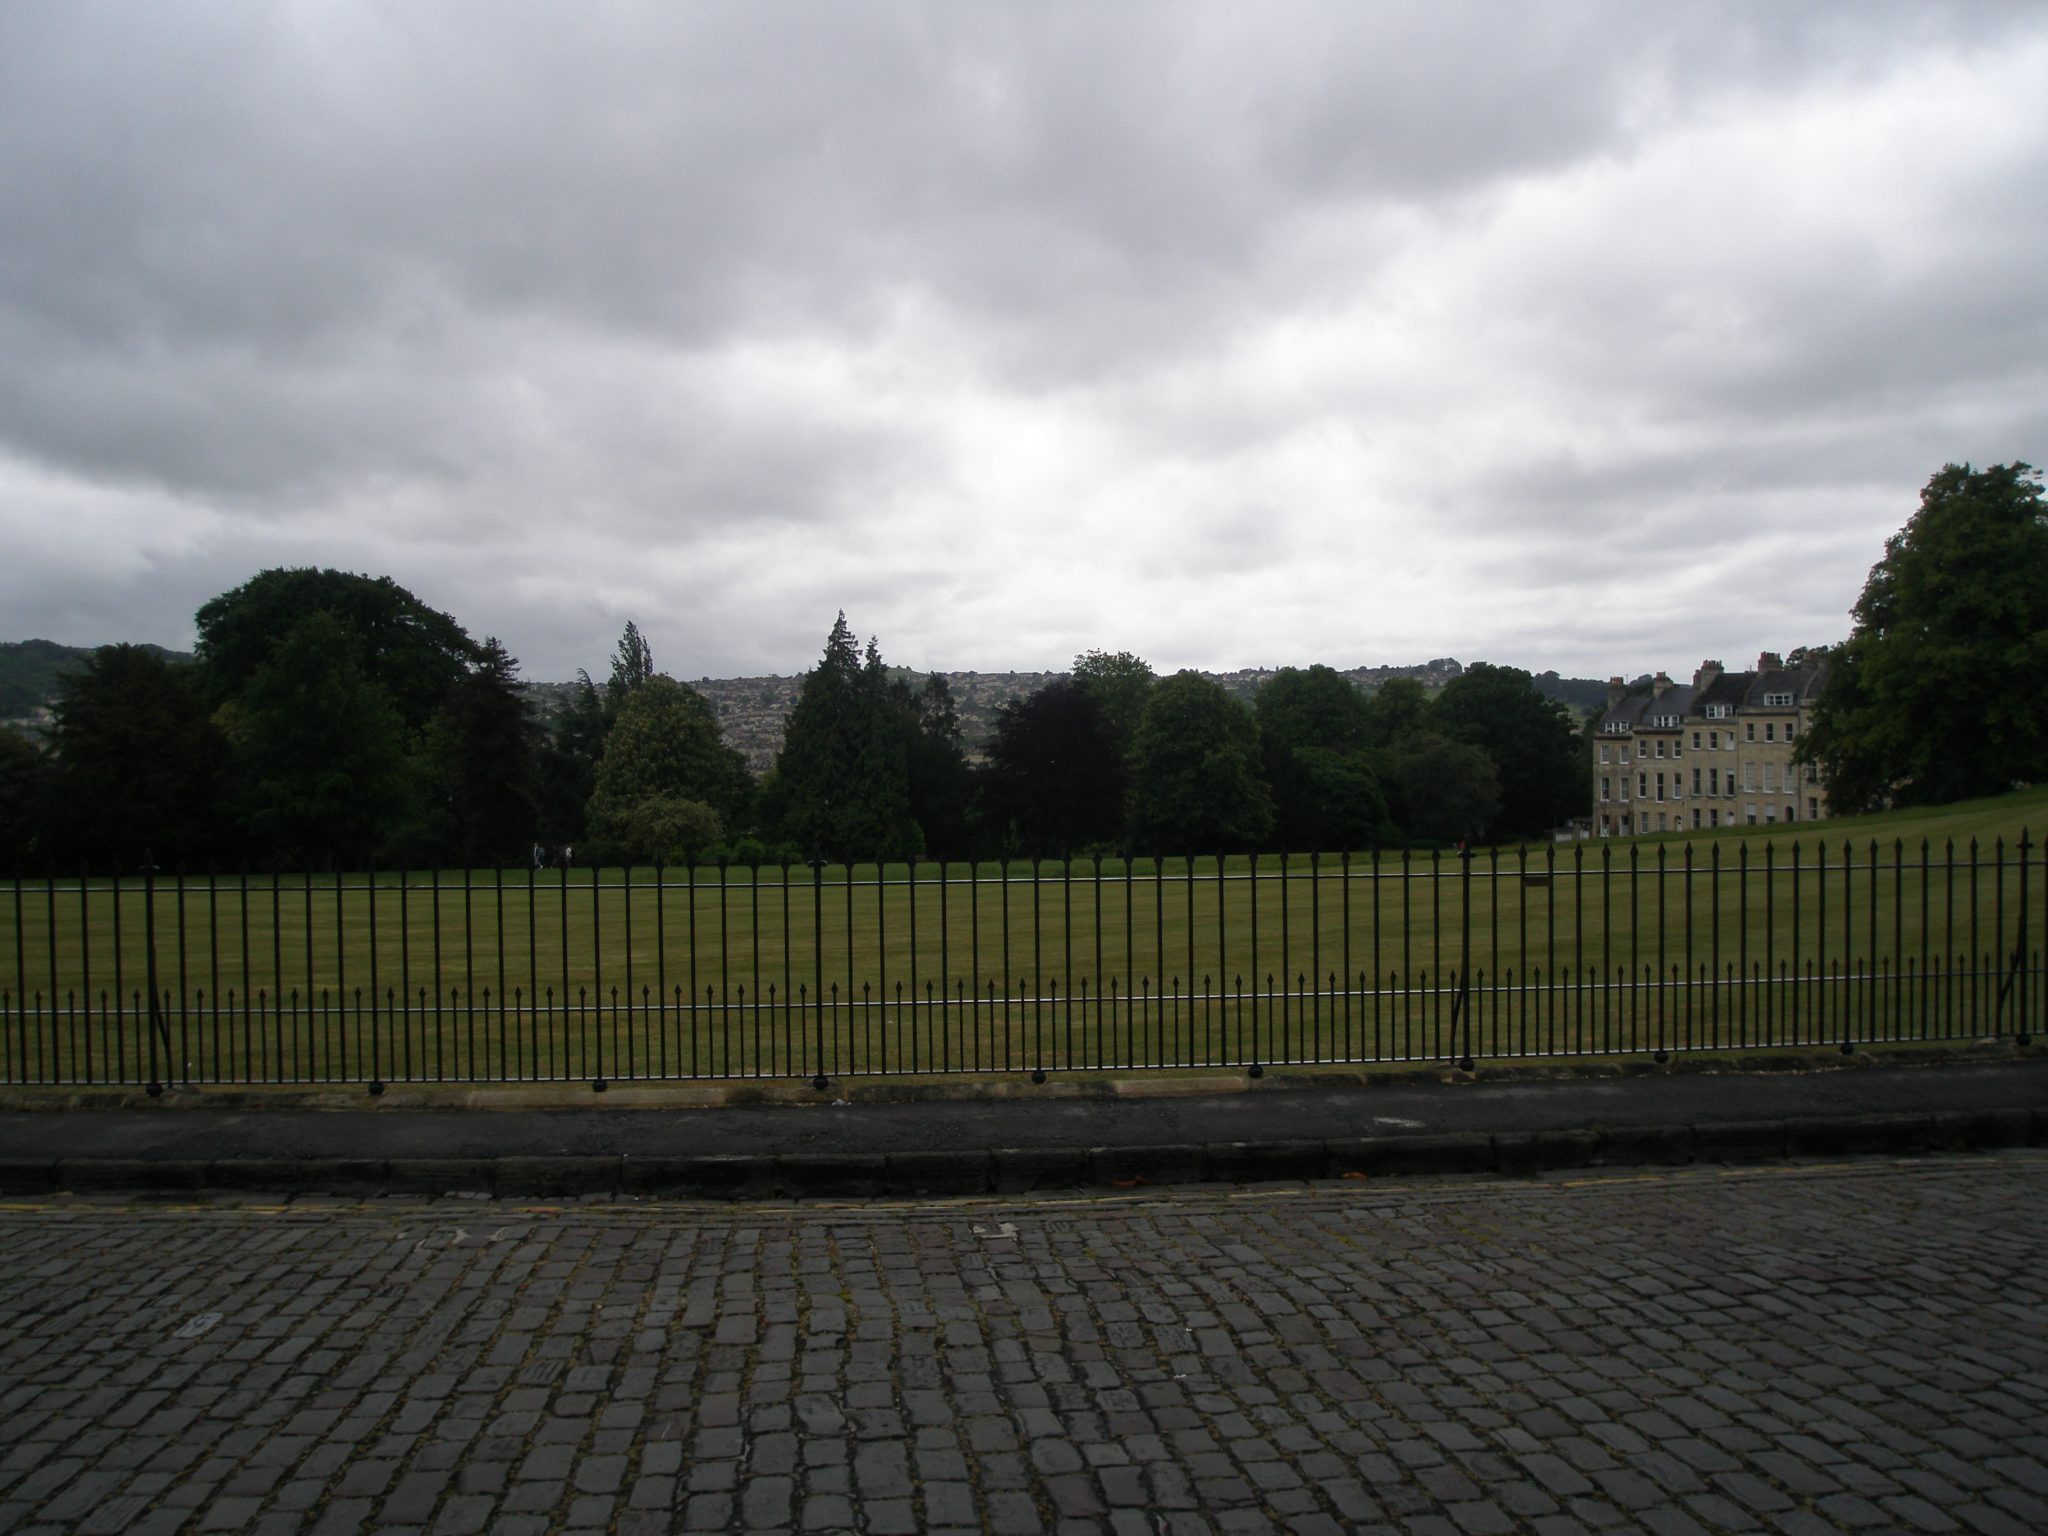 More of England's tempermental skies (which I love) over the Royal Crescent's great lawn